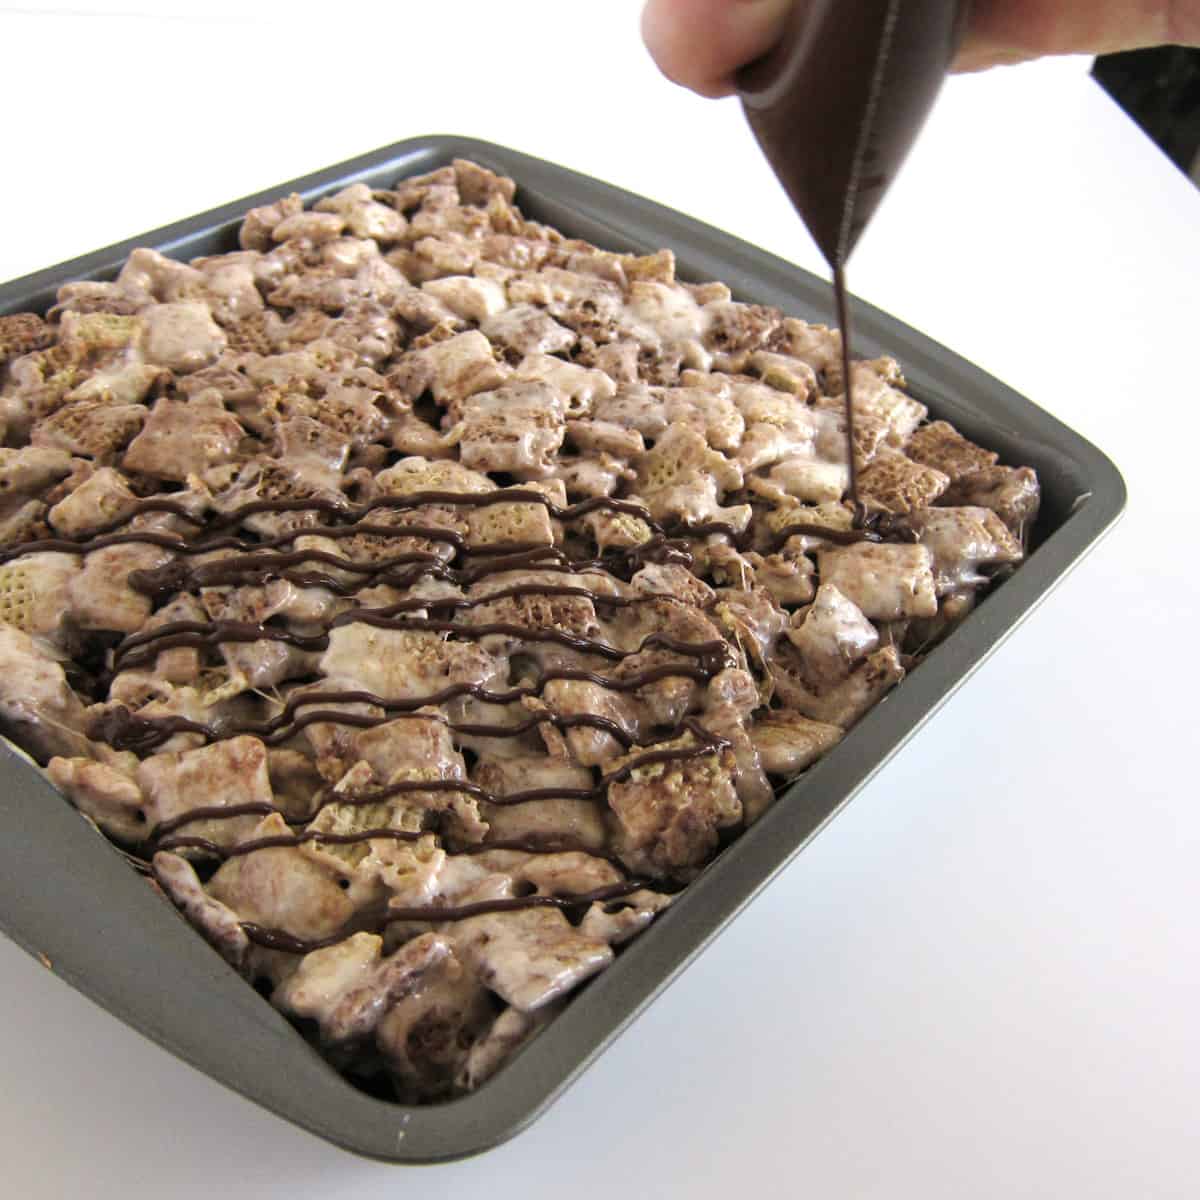 drizzle melted chocolate and Nutella over the chocolate Chex cereal treats